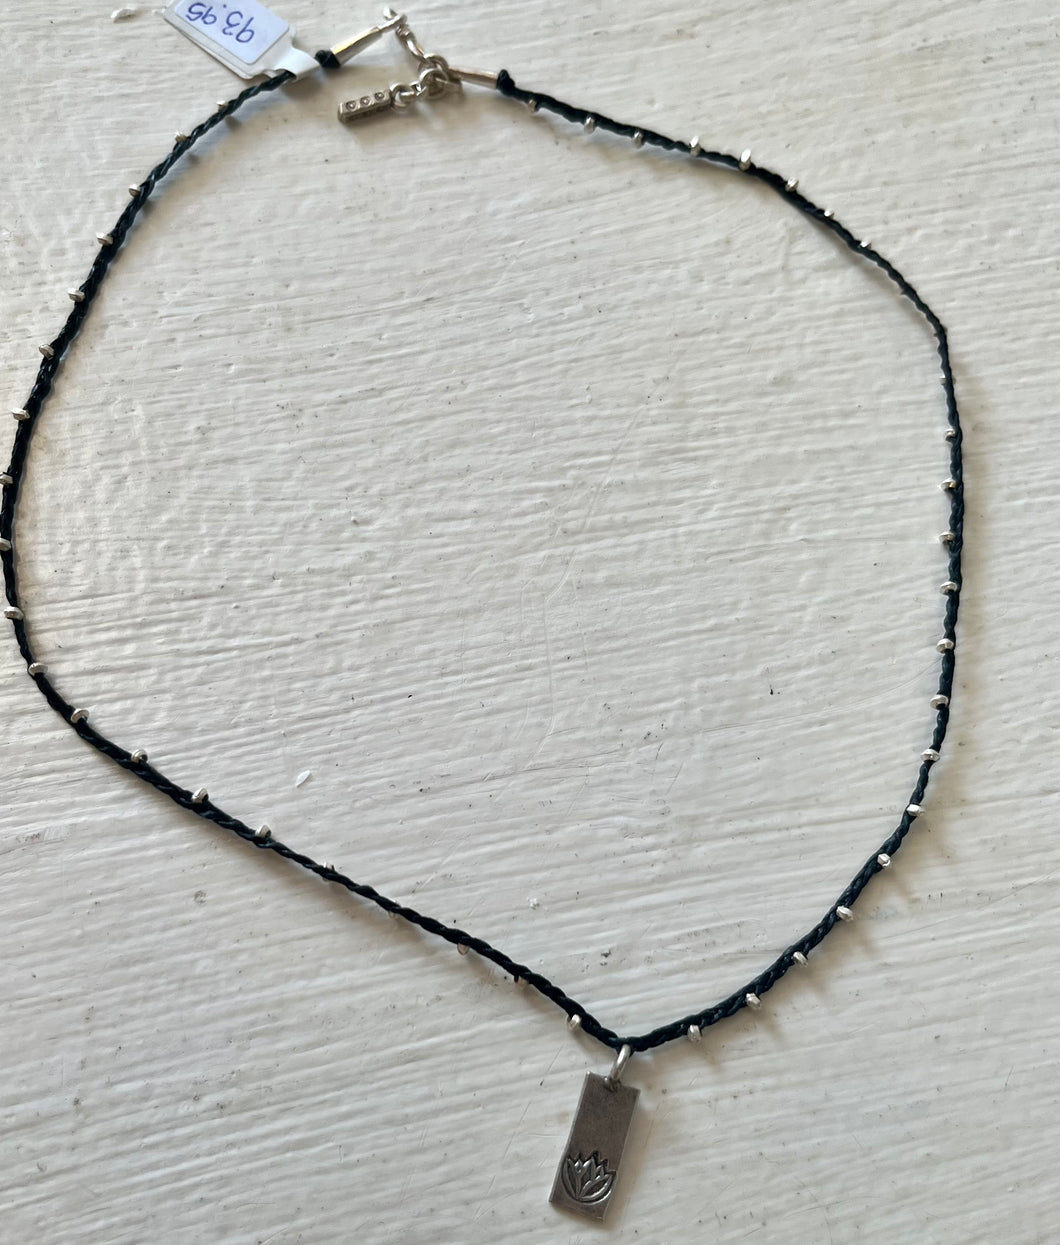 Waxed Cord Necklace with Simple Silver Beading with Lotus Stamp - Handcrafted Karen Tribe Thailand